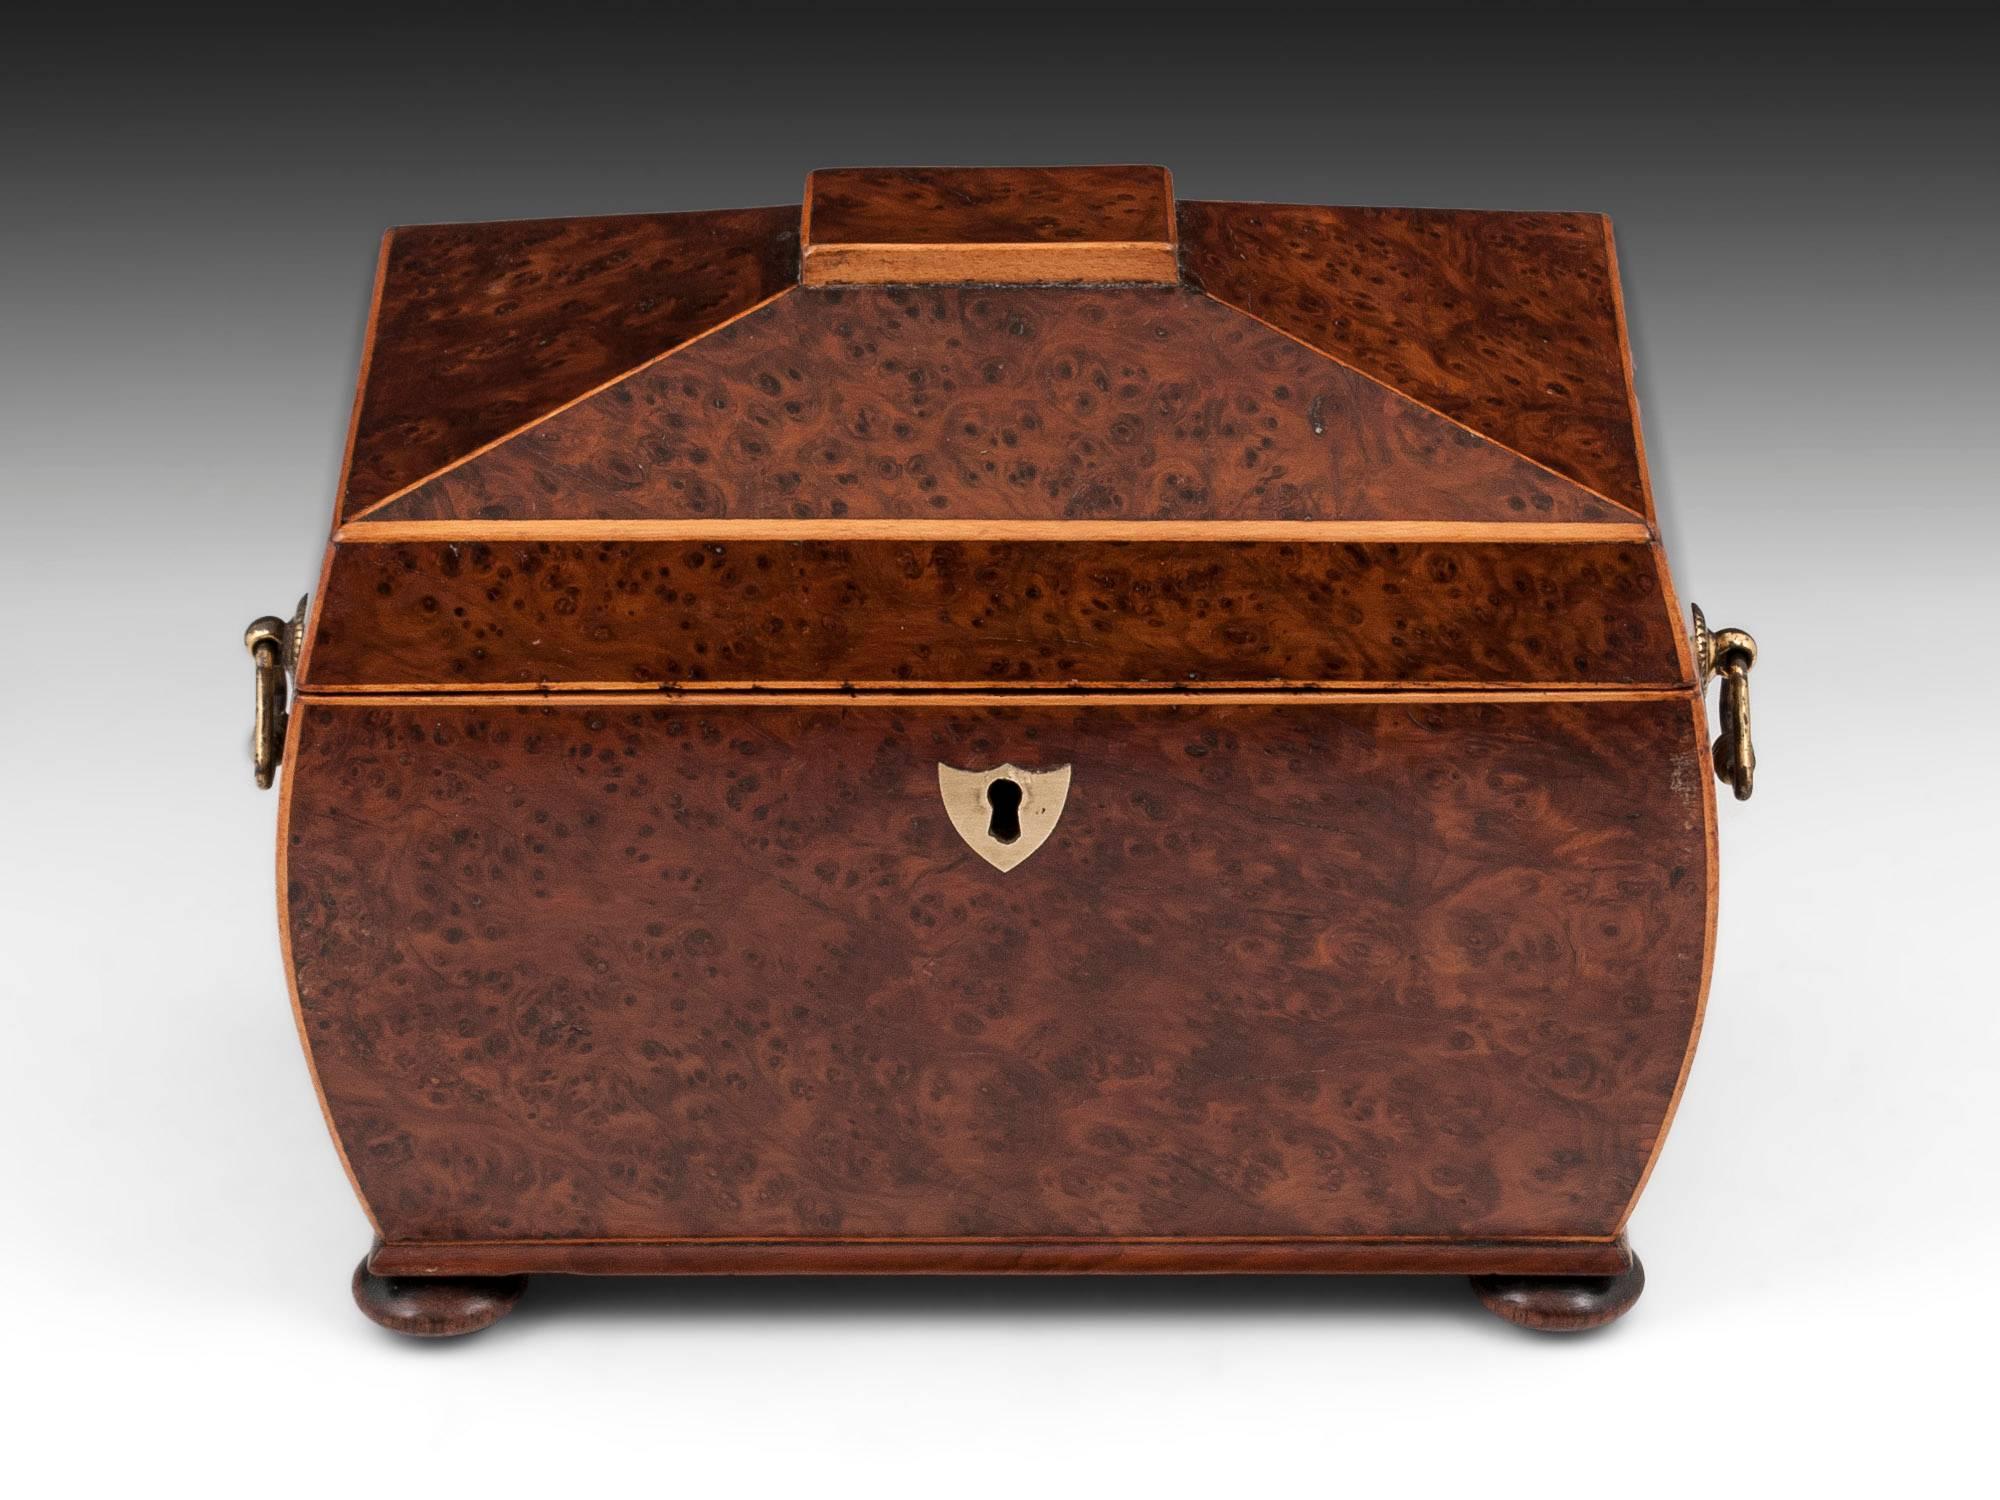 Antique bombe shaped tea caddy veneered in burr yew with boxwood edging, has two brass carry handles, shield shaped escutcheon and stands on four turned wooden bun feet. 

This antique Regency tea caddy interior features two compartments with bone